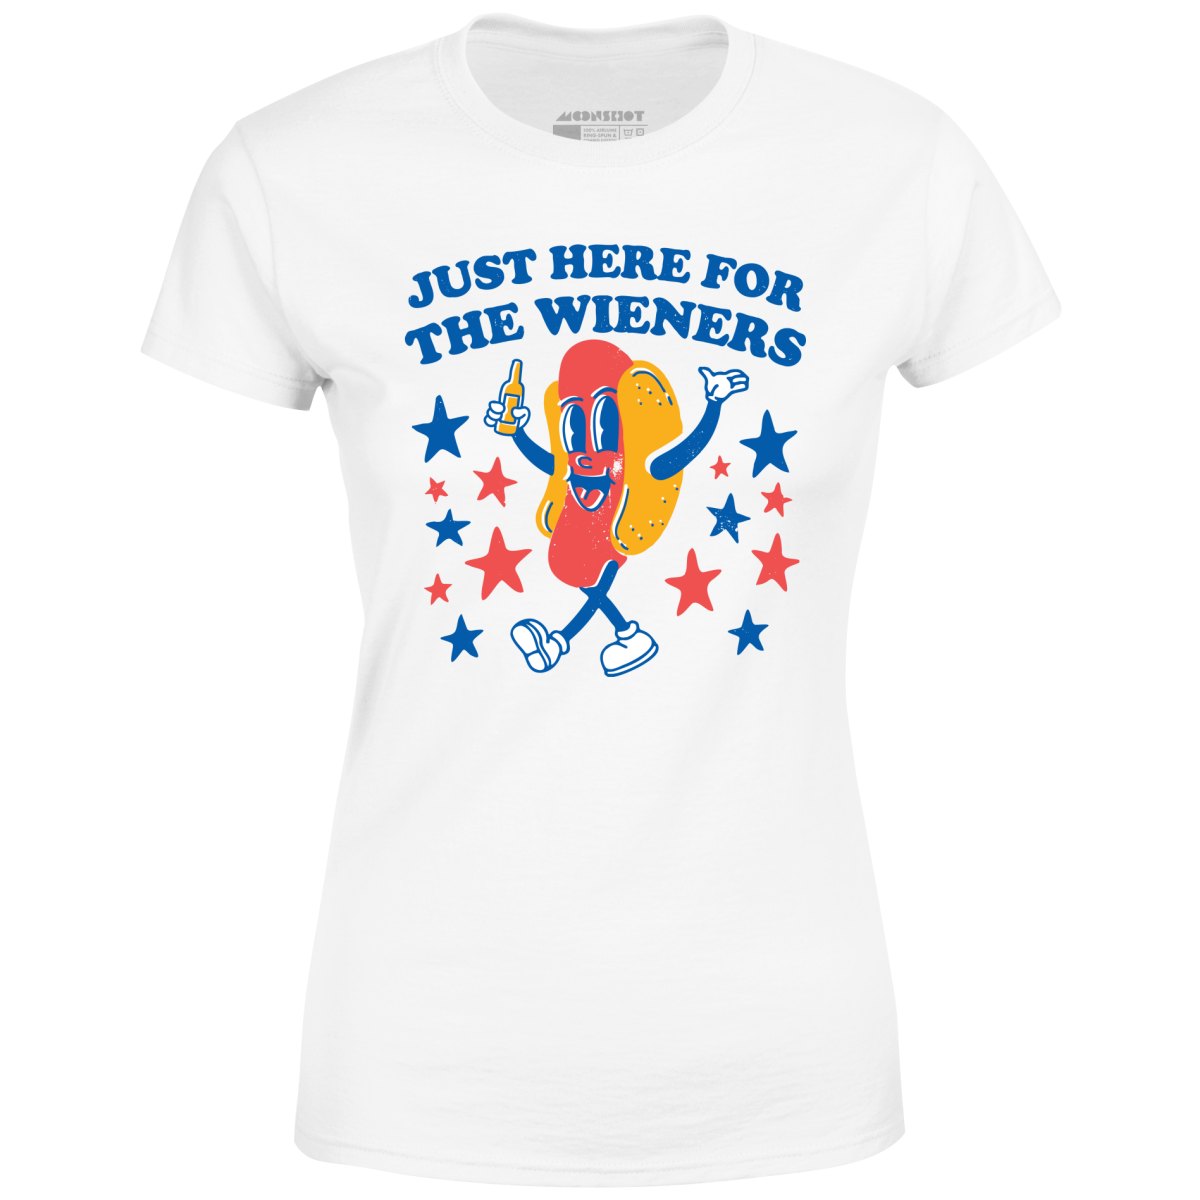 Just Here For The Wieners - Women's T-Shirt